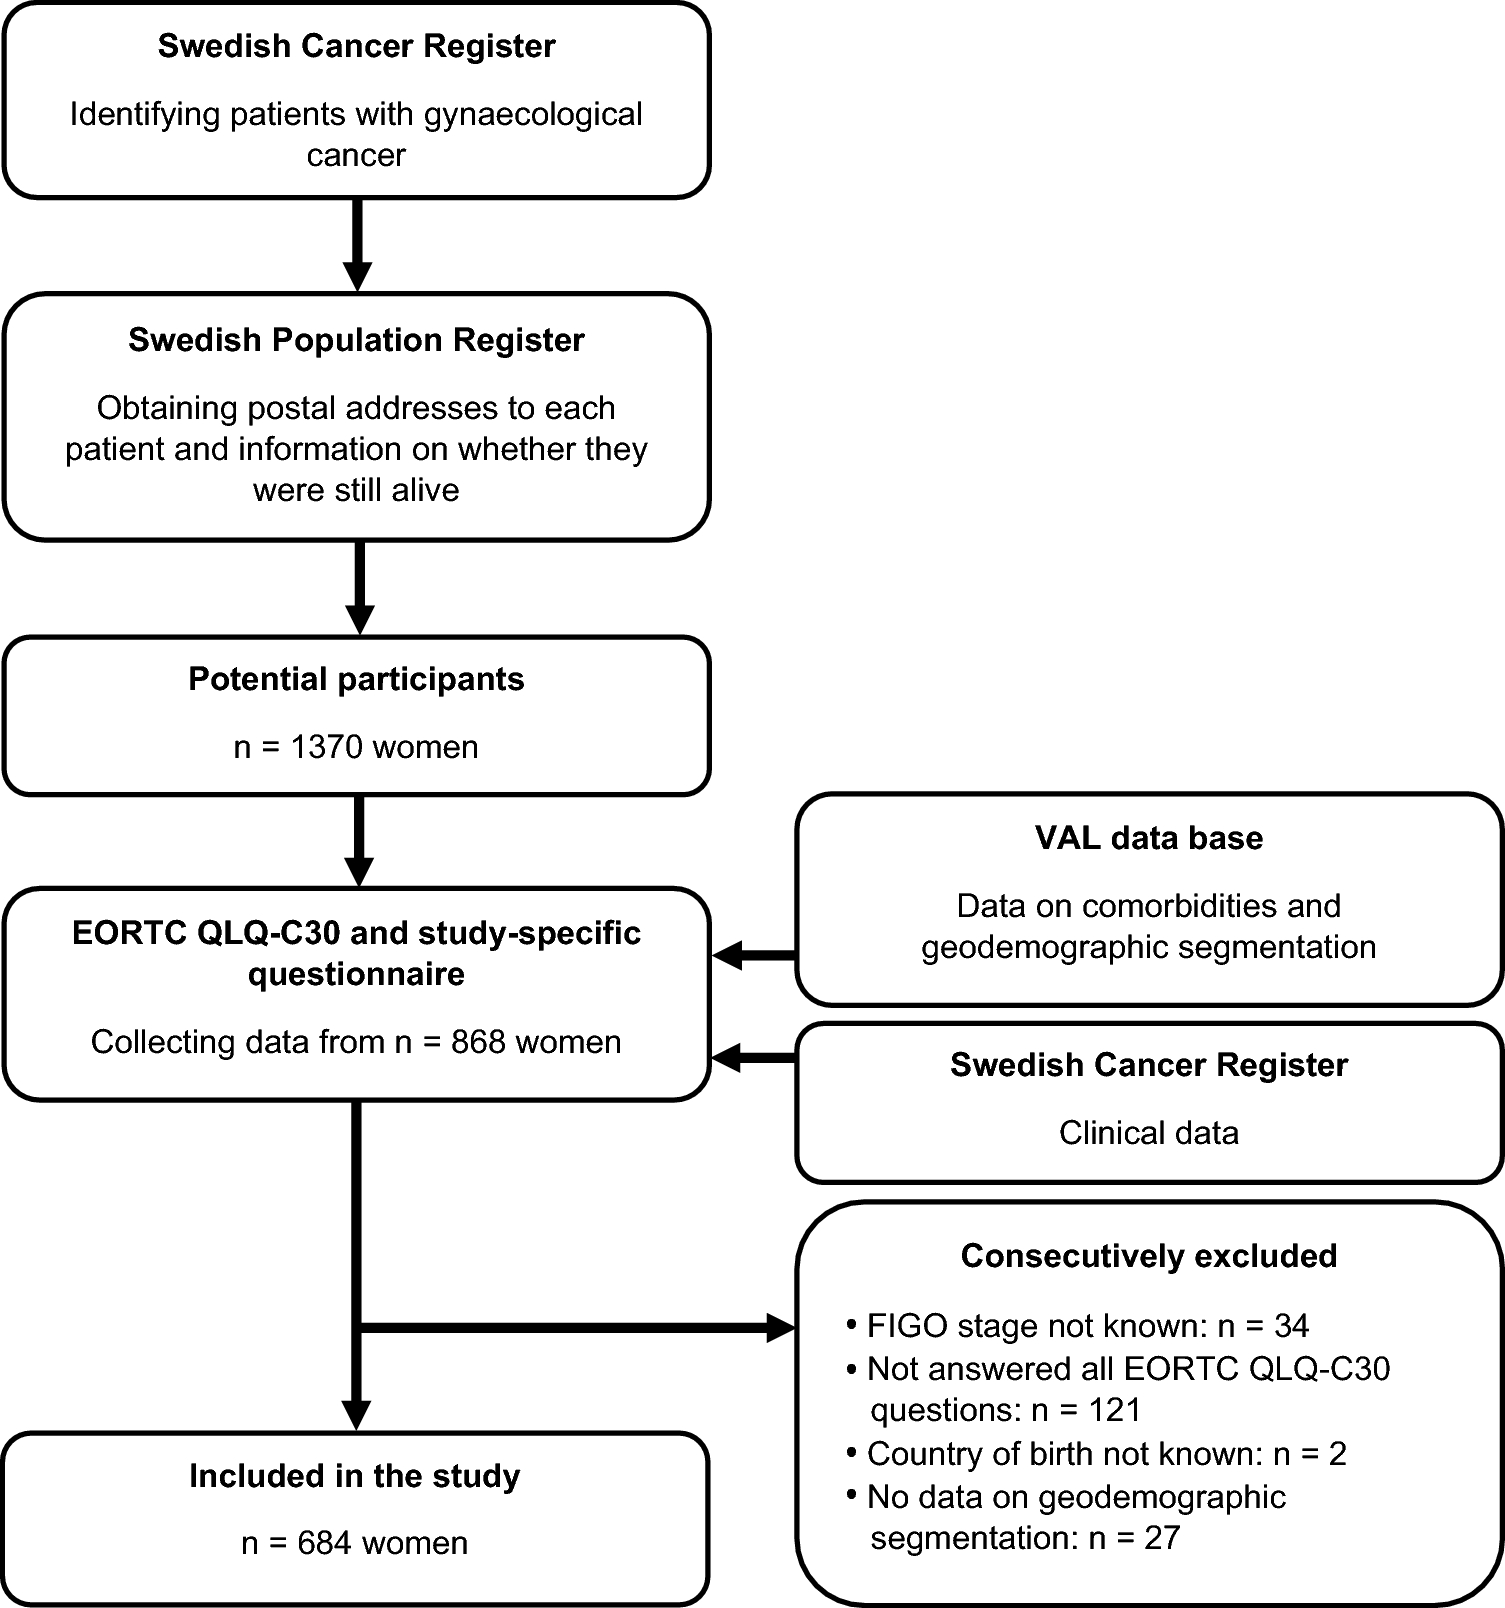 Differences in health-related quality of life between native and foreign-born gynaecological cancer patients in Sweden: a five-year cross-sectional study